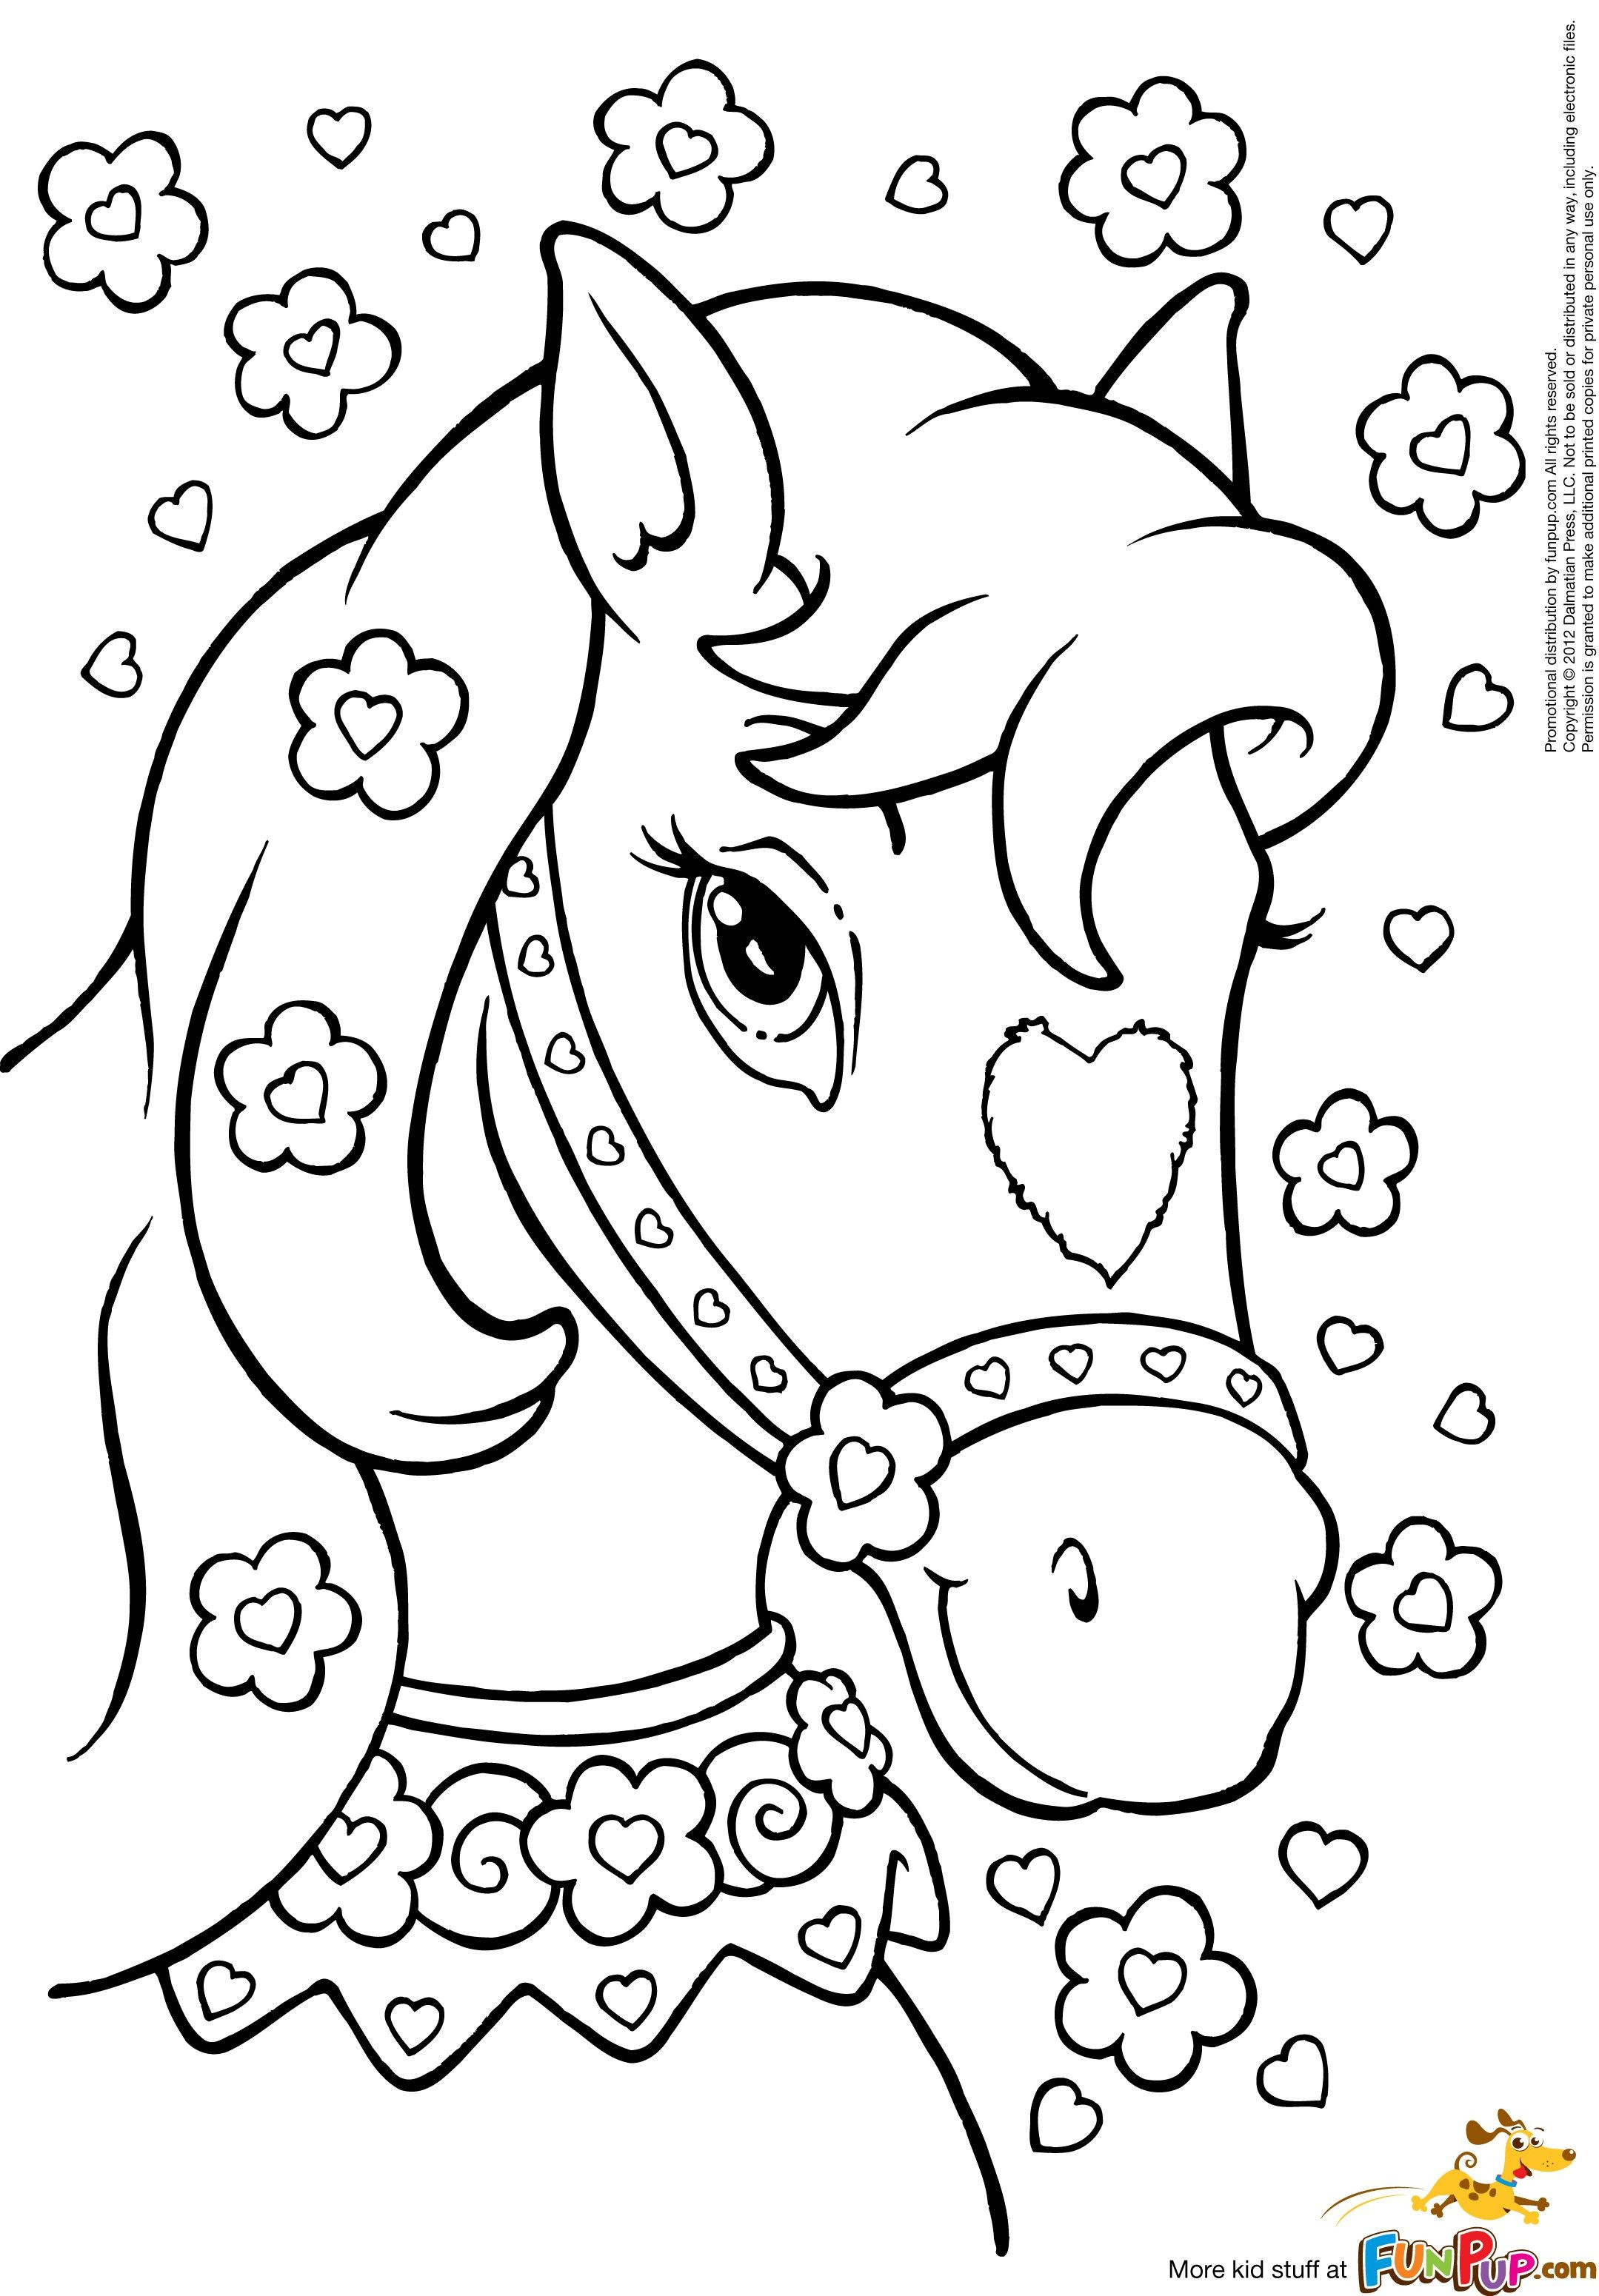 Printable Princess Coloring Pages For Girls
 printable princess coloring pages